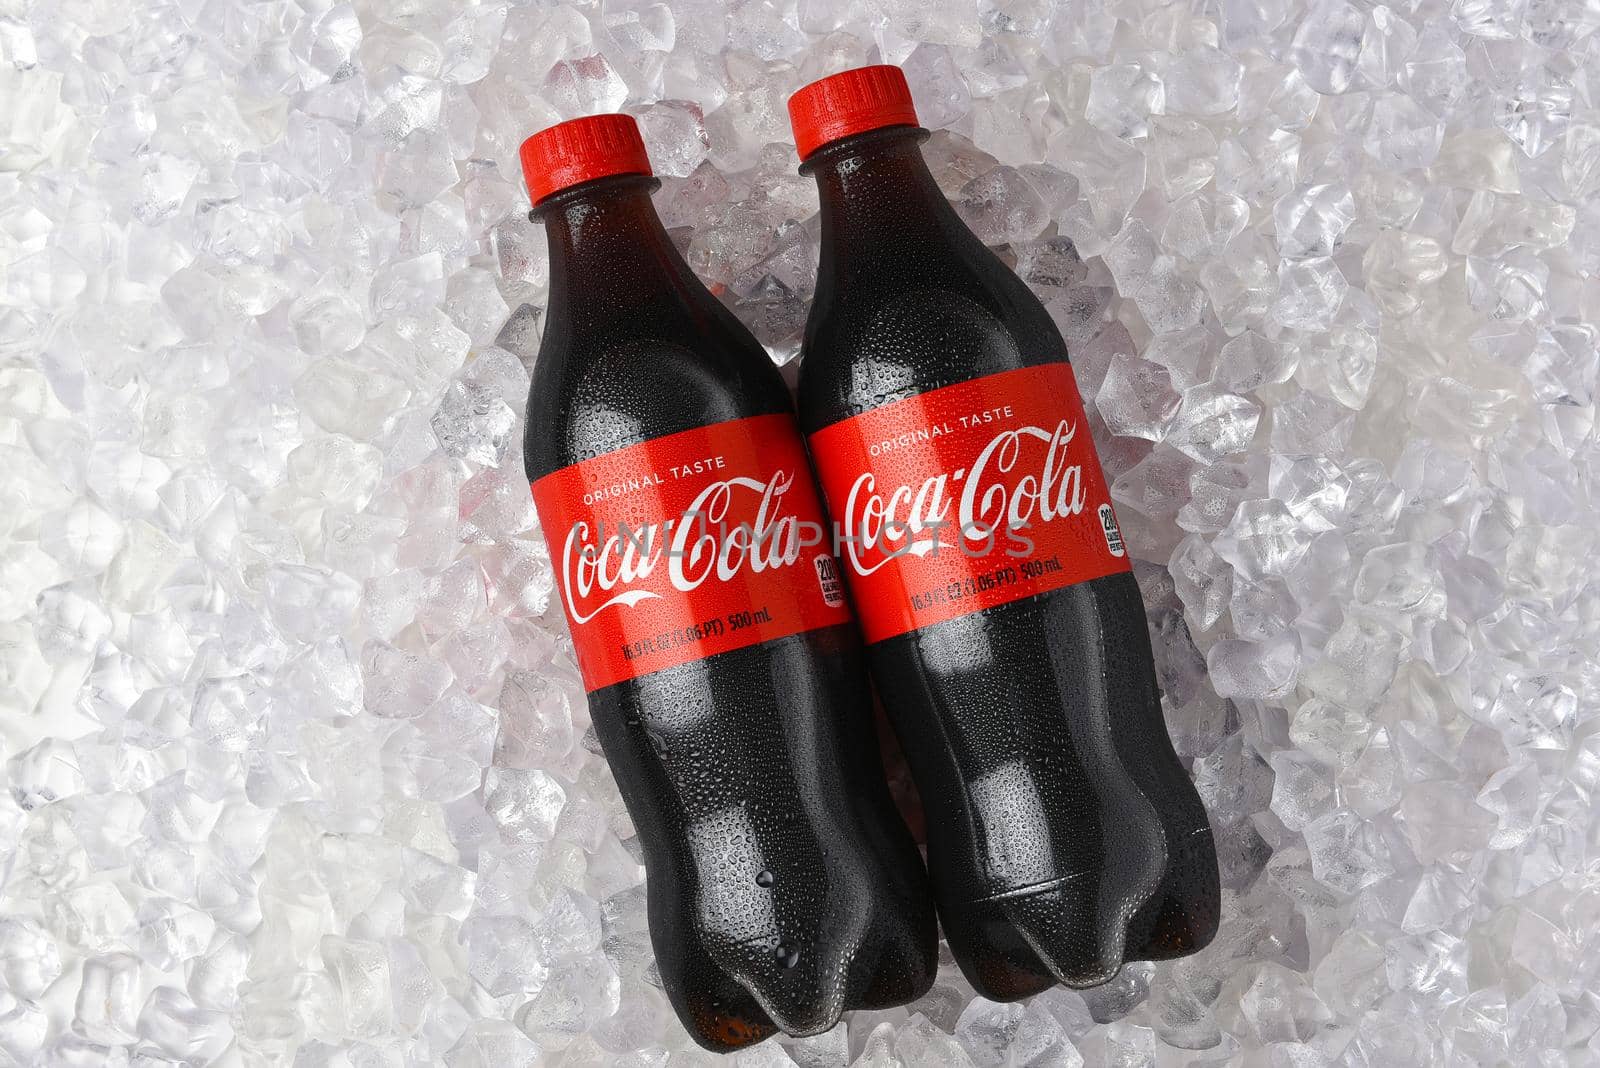 IRVINE, CALIFORNIA - 26 JUNE 2021: Two plastic bottles of Coca-Cola in a bed of ice.